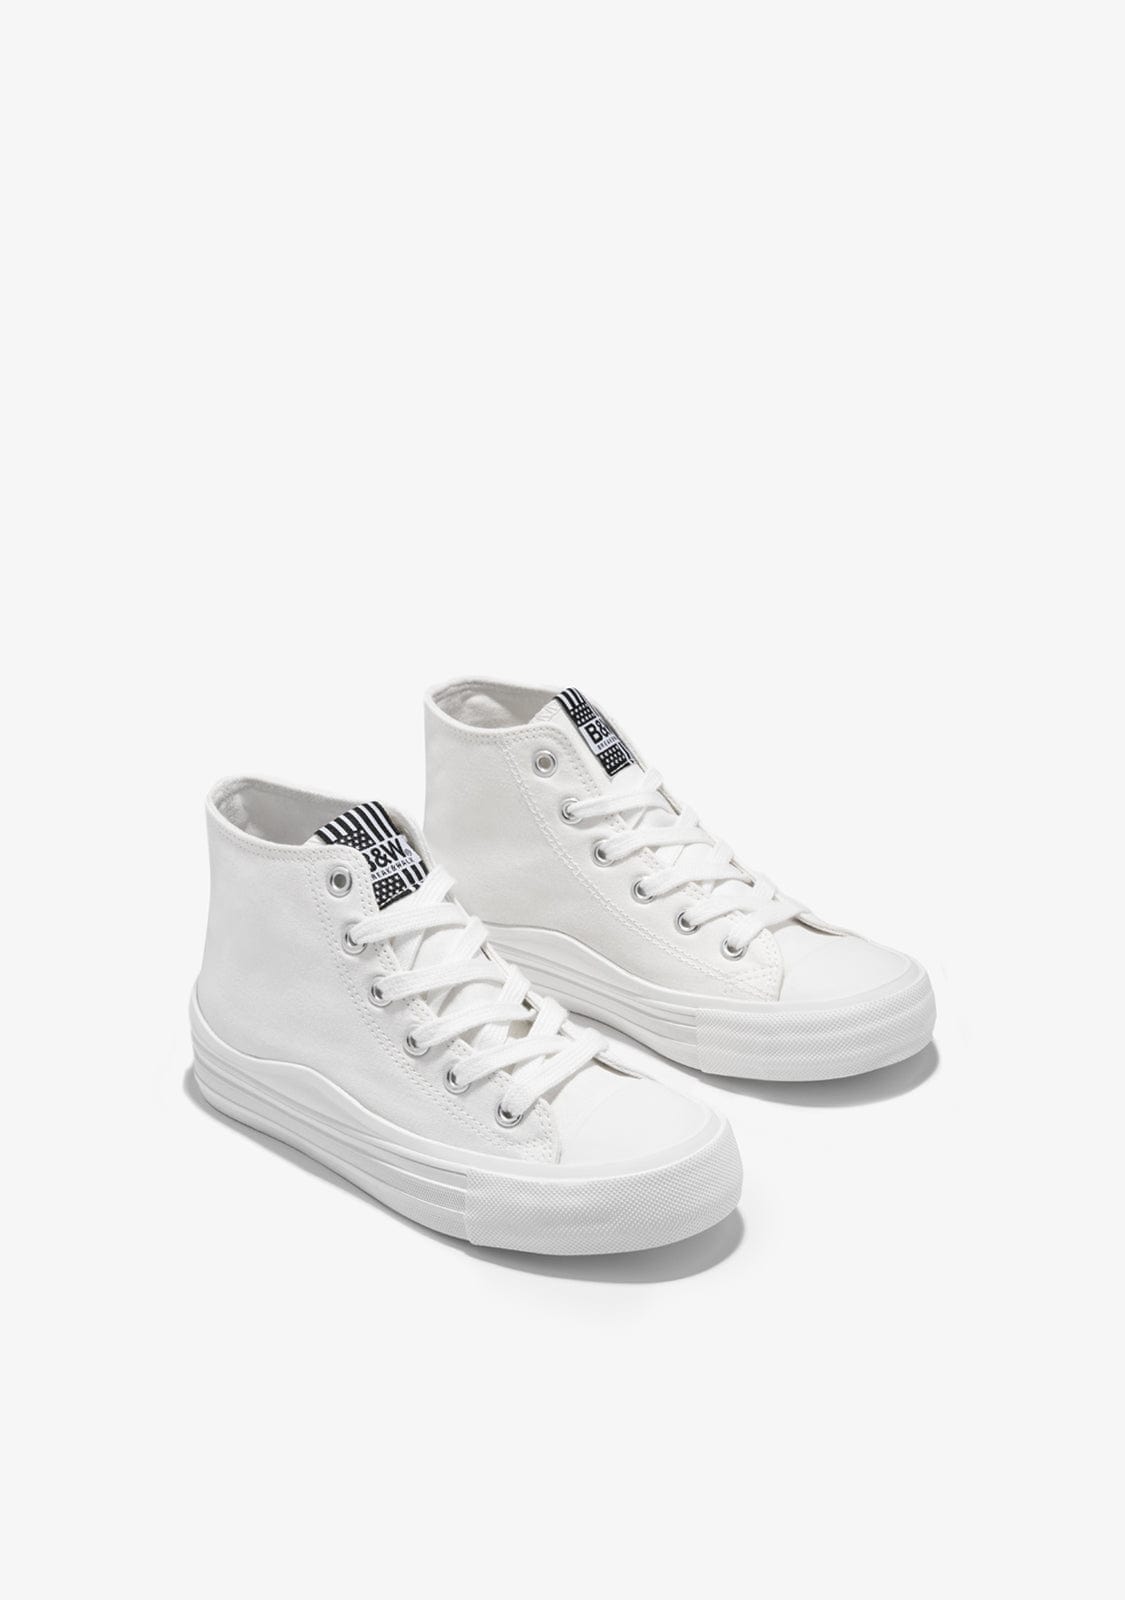 White Canvas High Top Sneakers